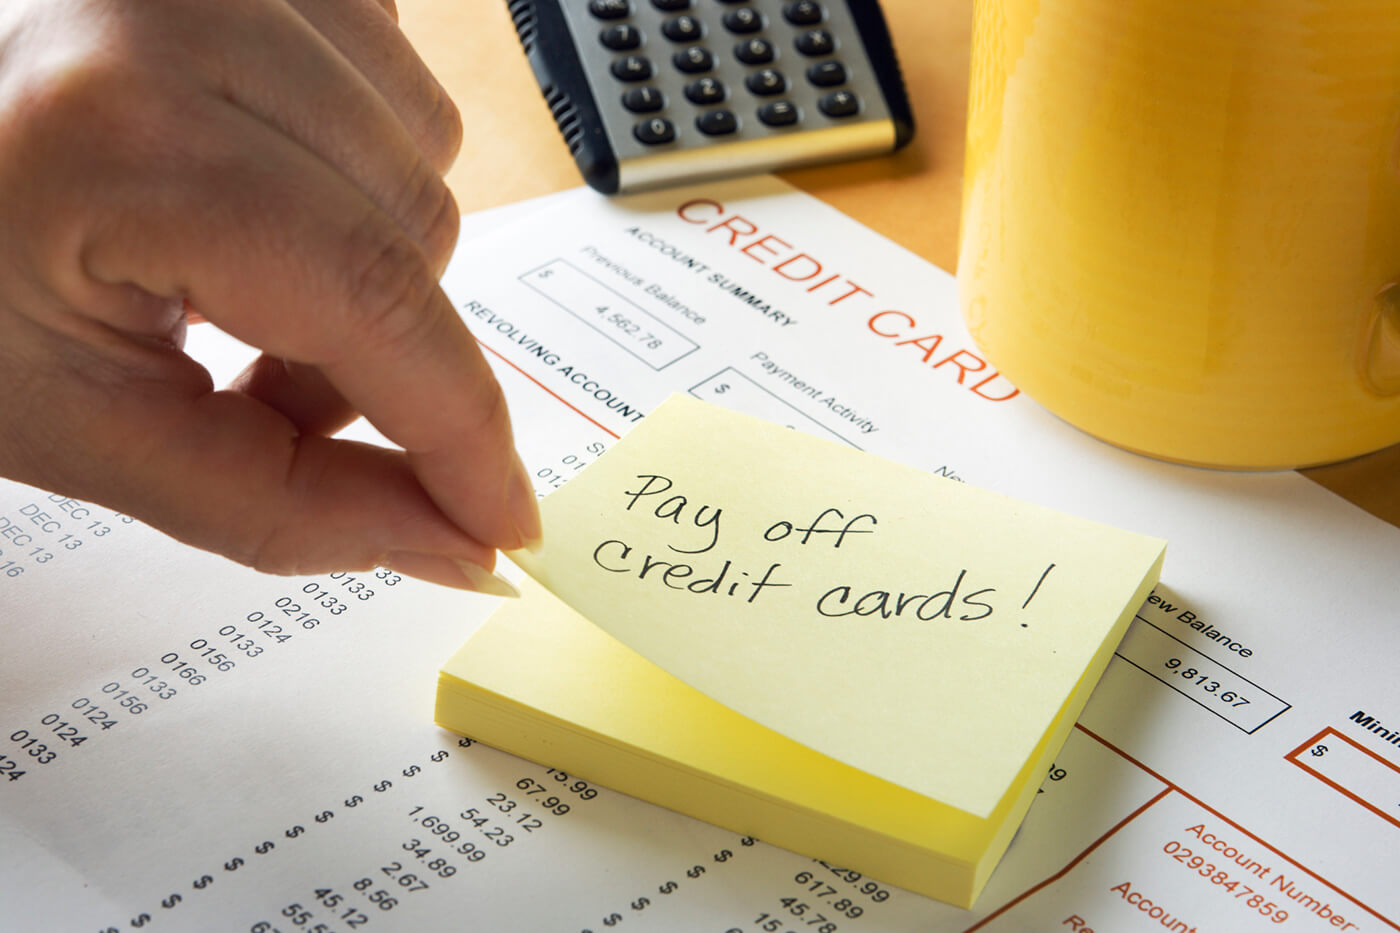 Learn This Advice for Paying Off Credit Cards